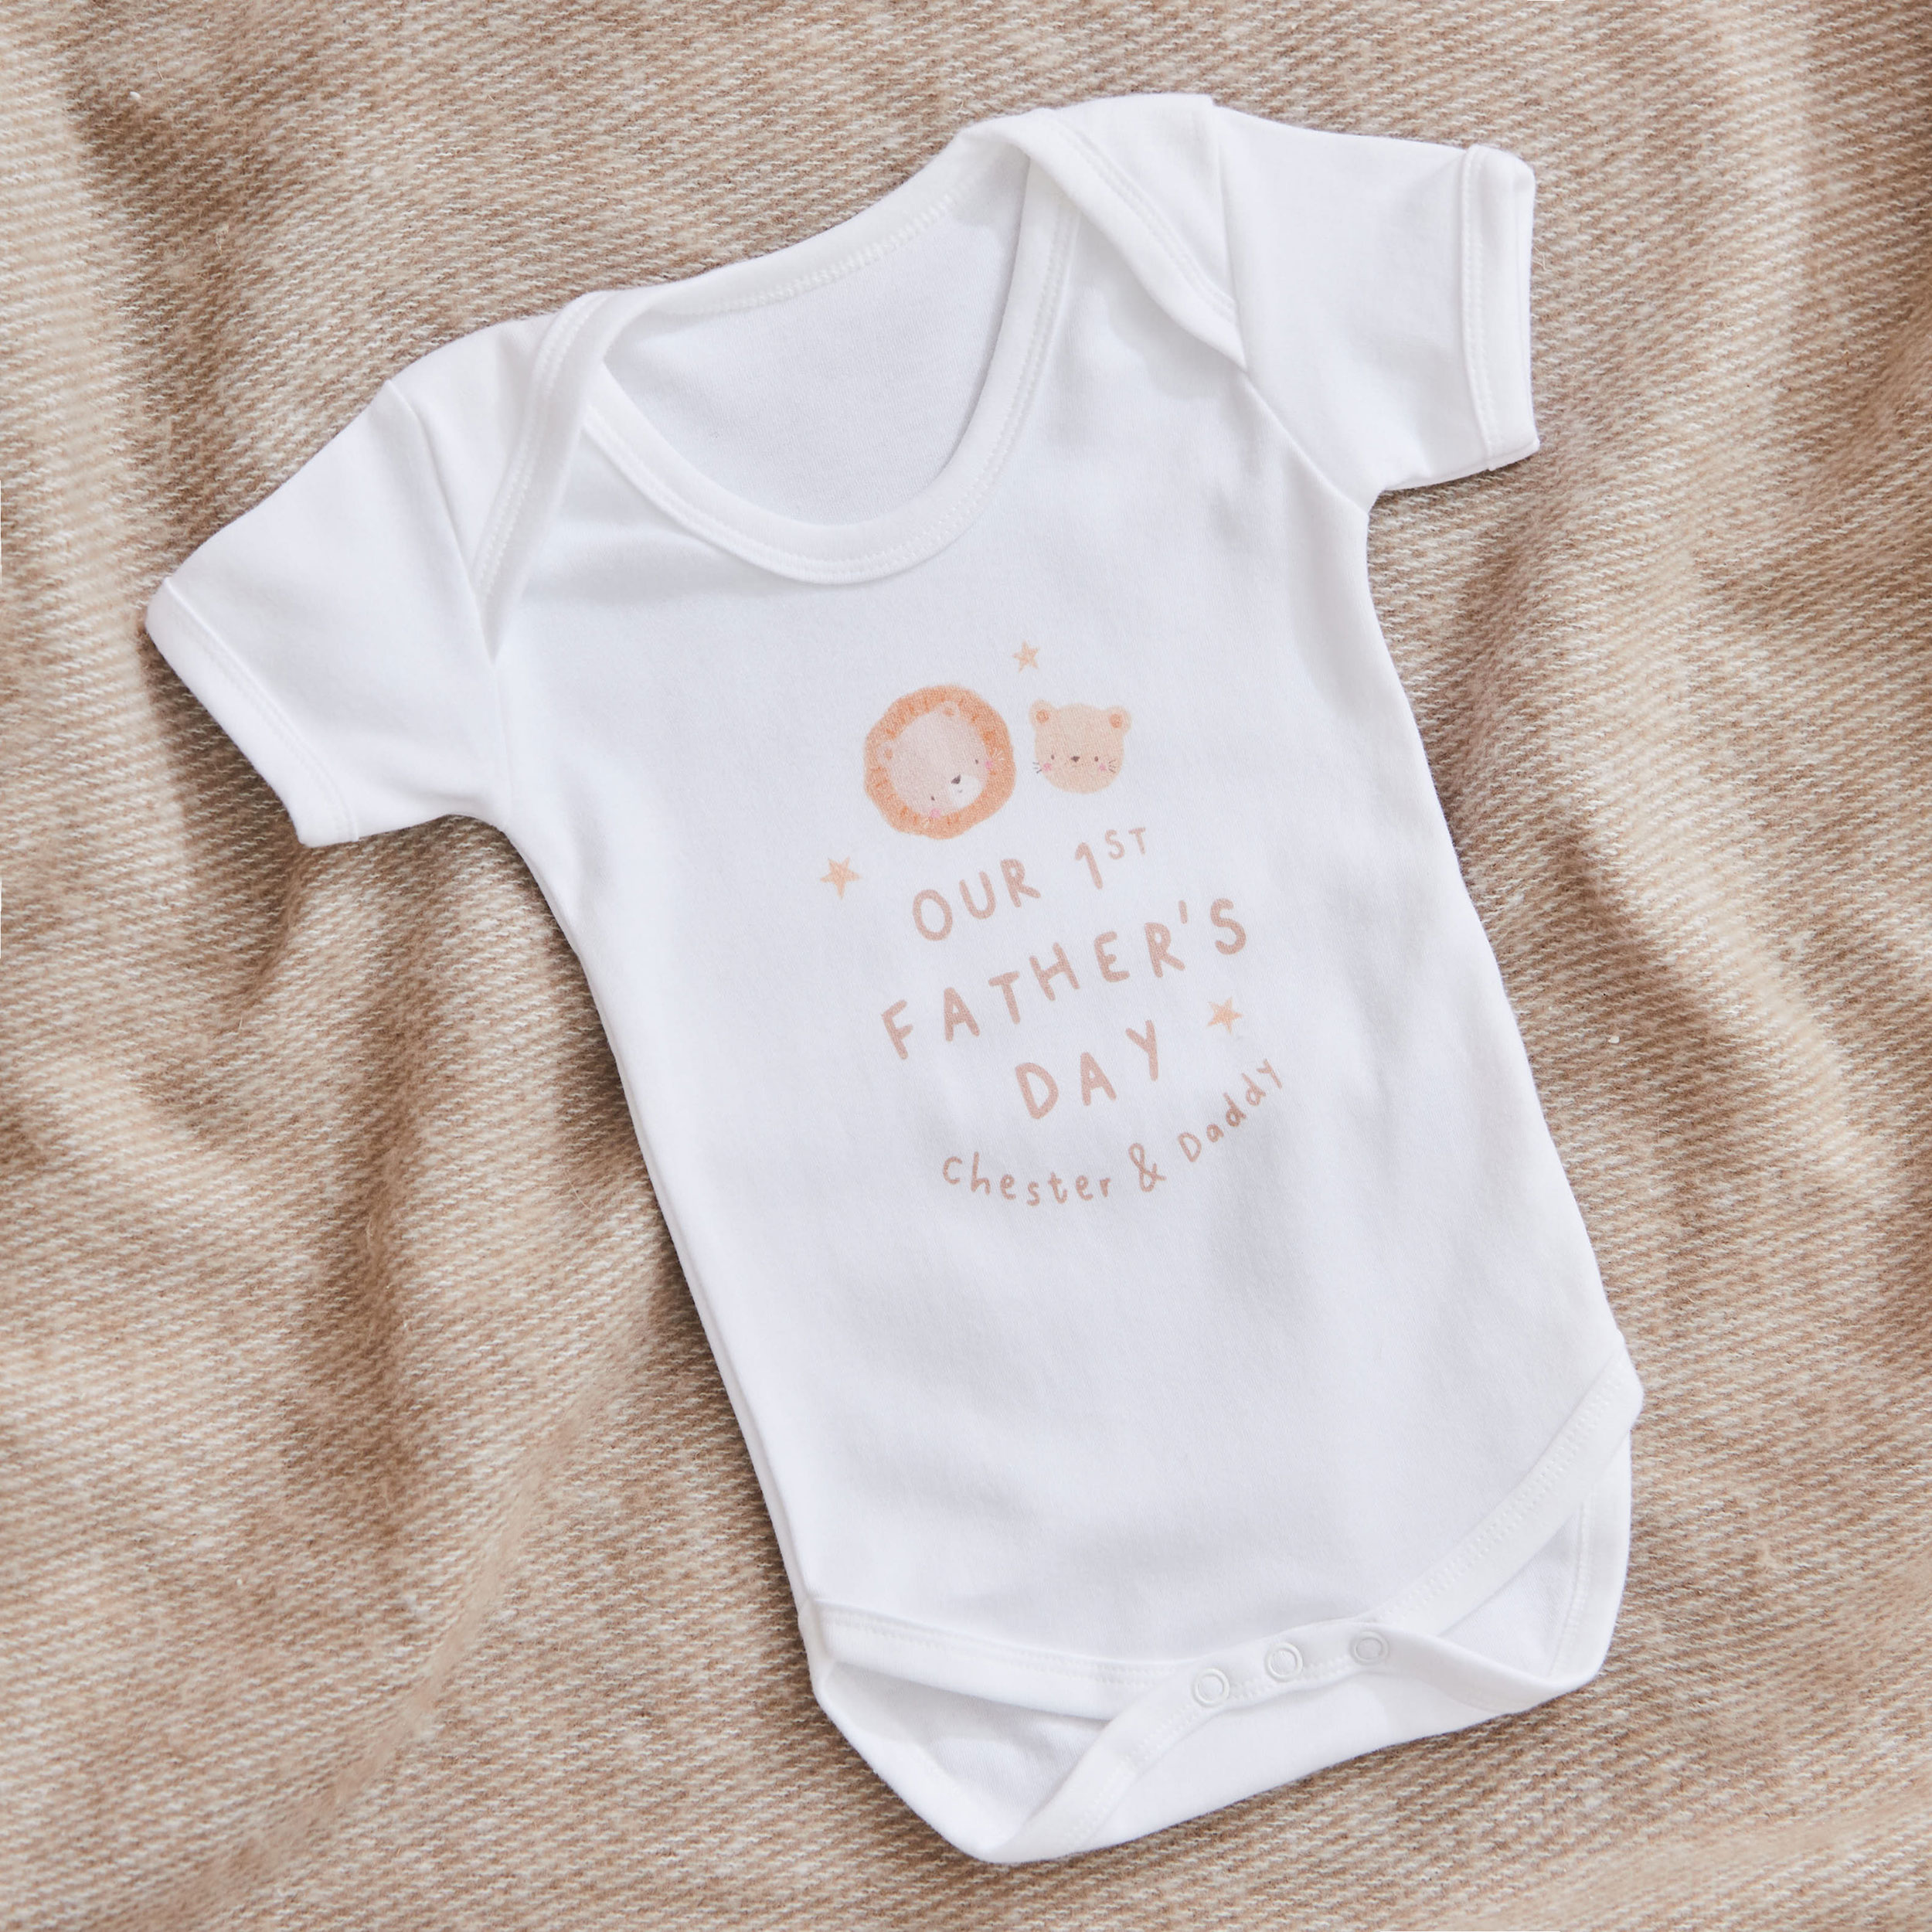 Personalised Our 1st Father's Day Lion Design Bodysuit